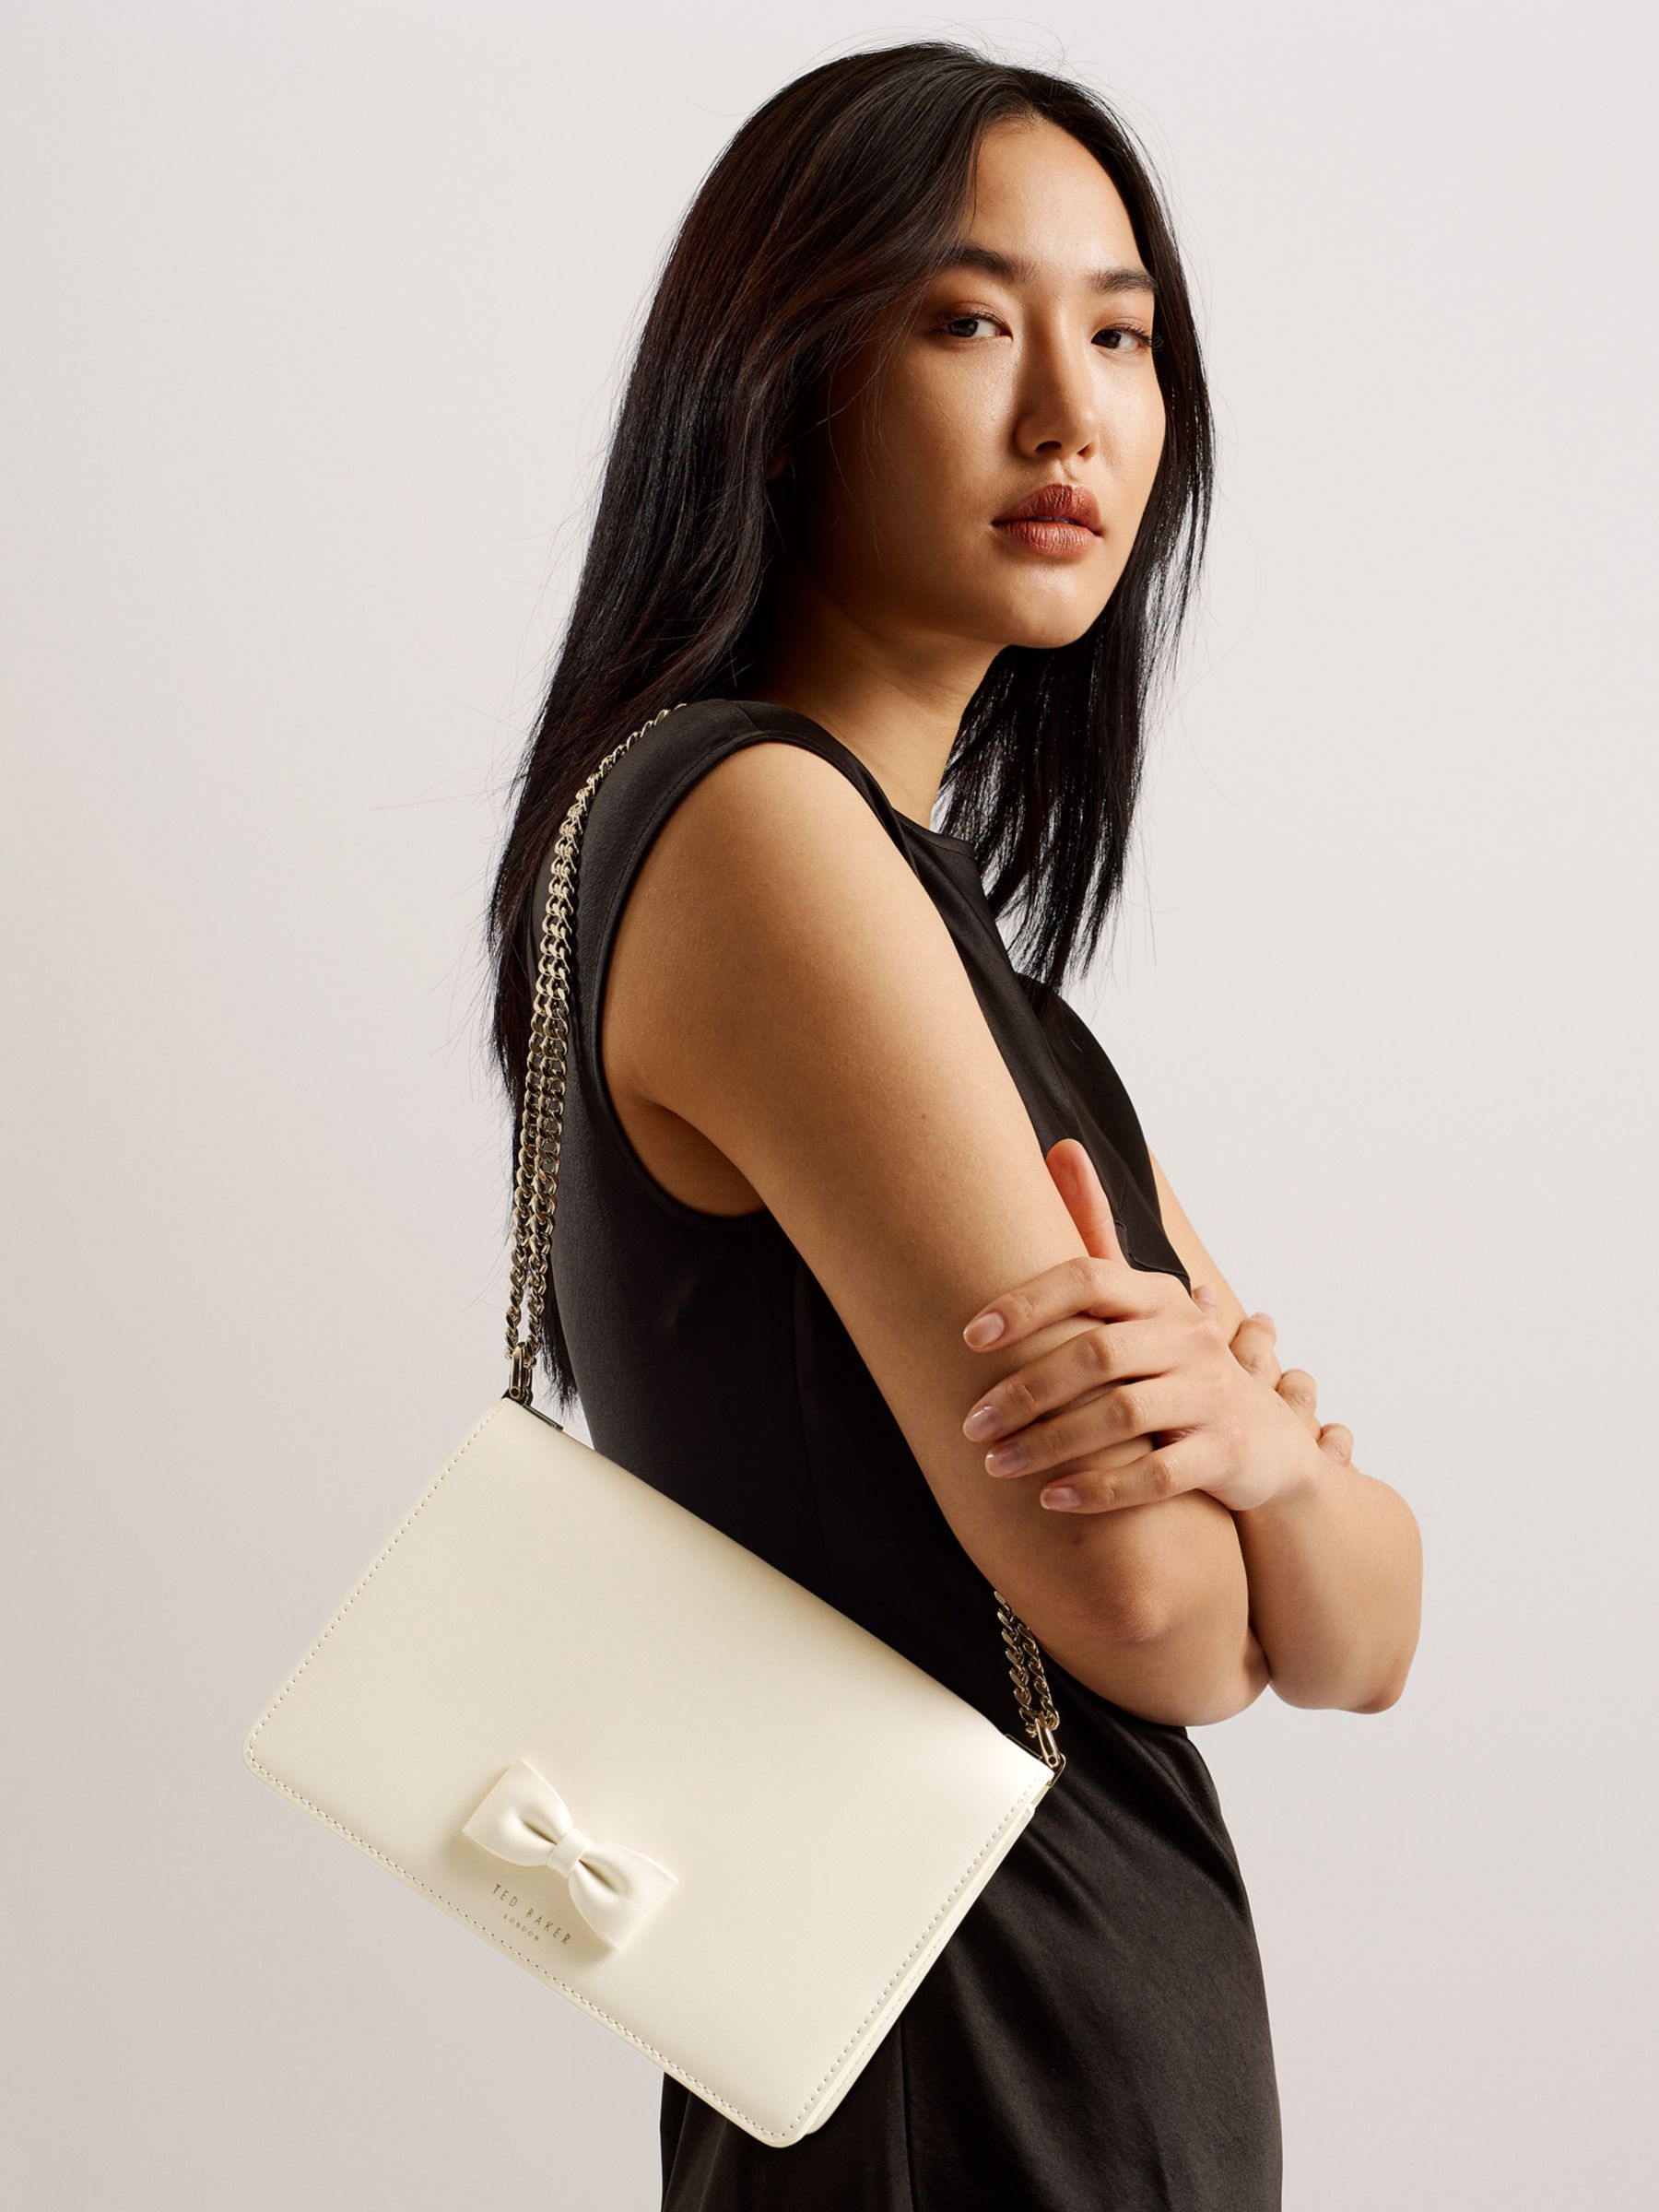 Buy Ted Baker Baeleen Bow Detail Cross Body Leather Bag, Natural Cream Online at johnlewis.com